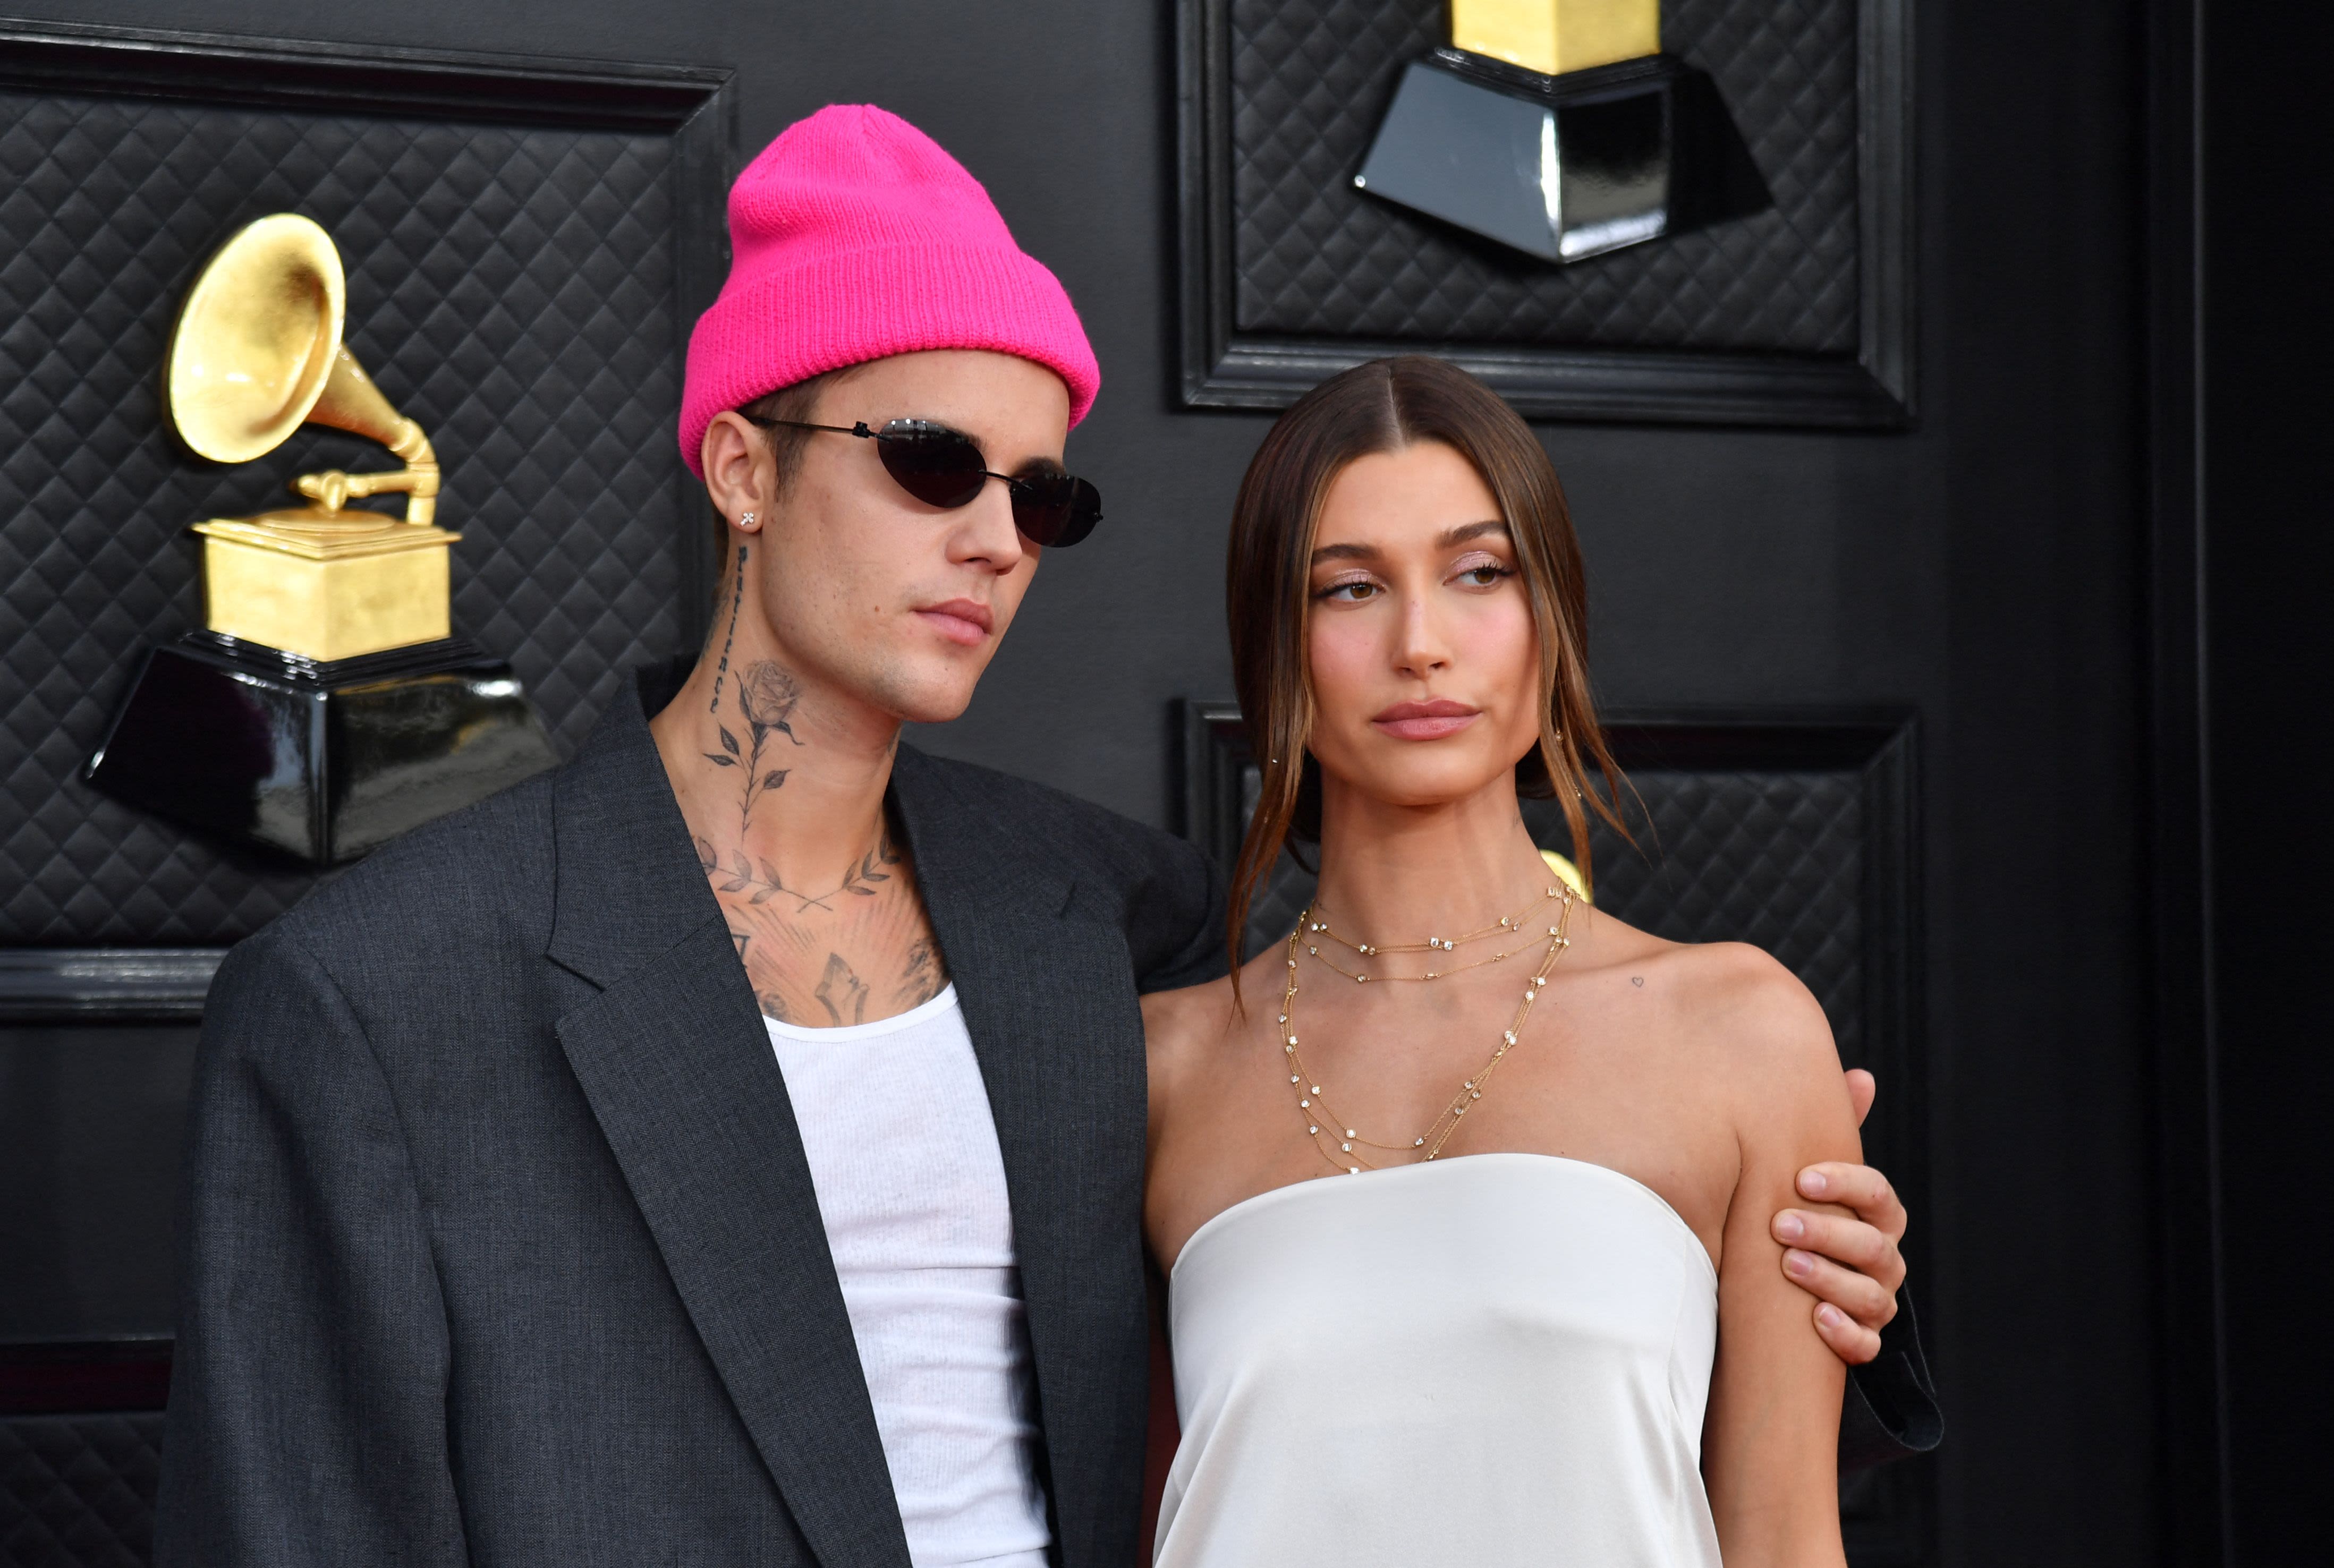 Baby baby baby soon: Justin and Hailey Bieber expecting a child